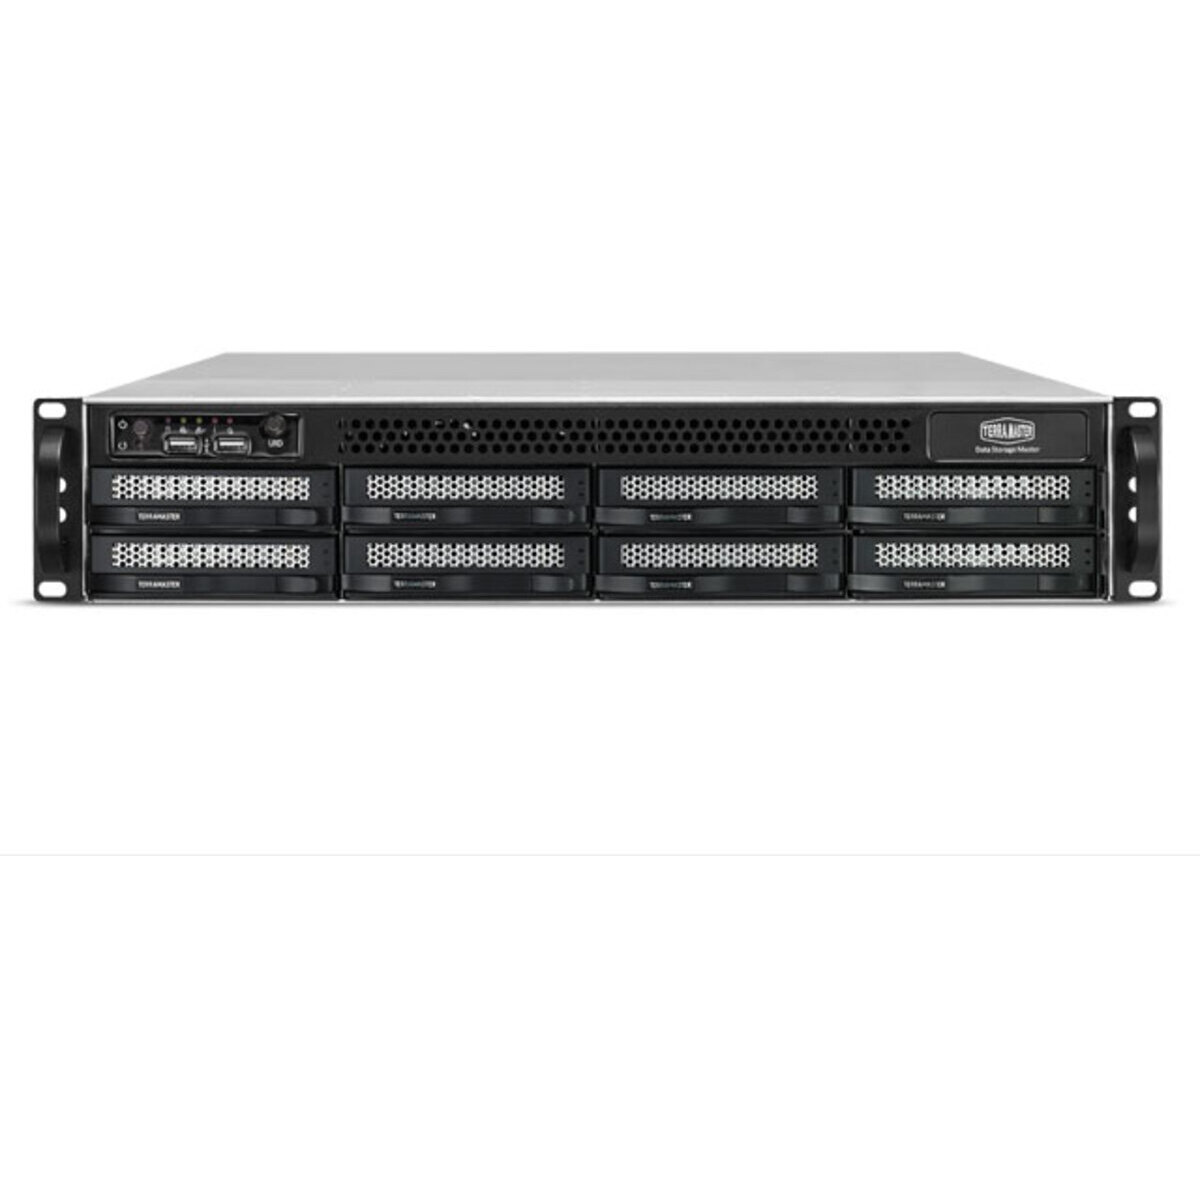 TerraMaster U8-522-9400 176tb 8-Bay RackMount Large Business / Enterprise NAS - Network Attached Storage Device 8x22tb Seagate IronWolf Pro ST22000NT001 3.5 7200rpm SATA 6Gb/s HDD NAS Class Drives Installed - Burn-In Tested U8-522-9400